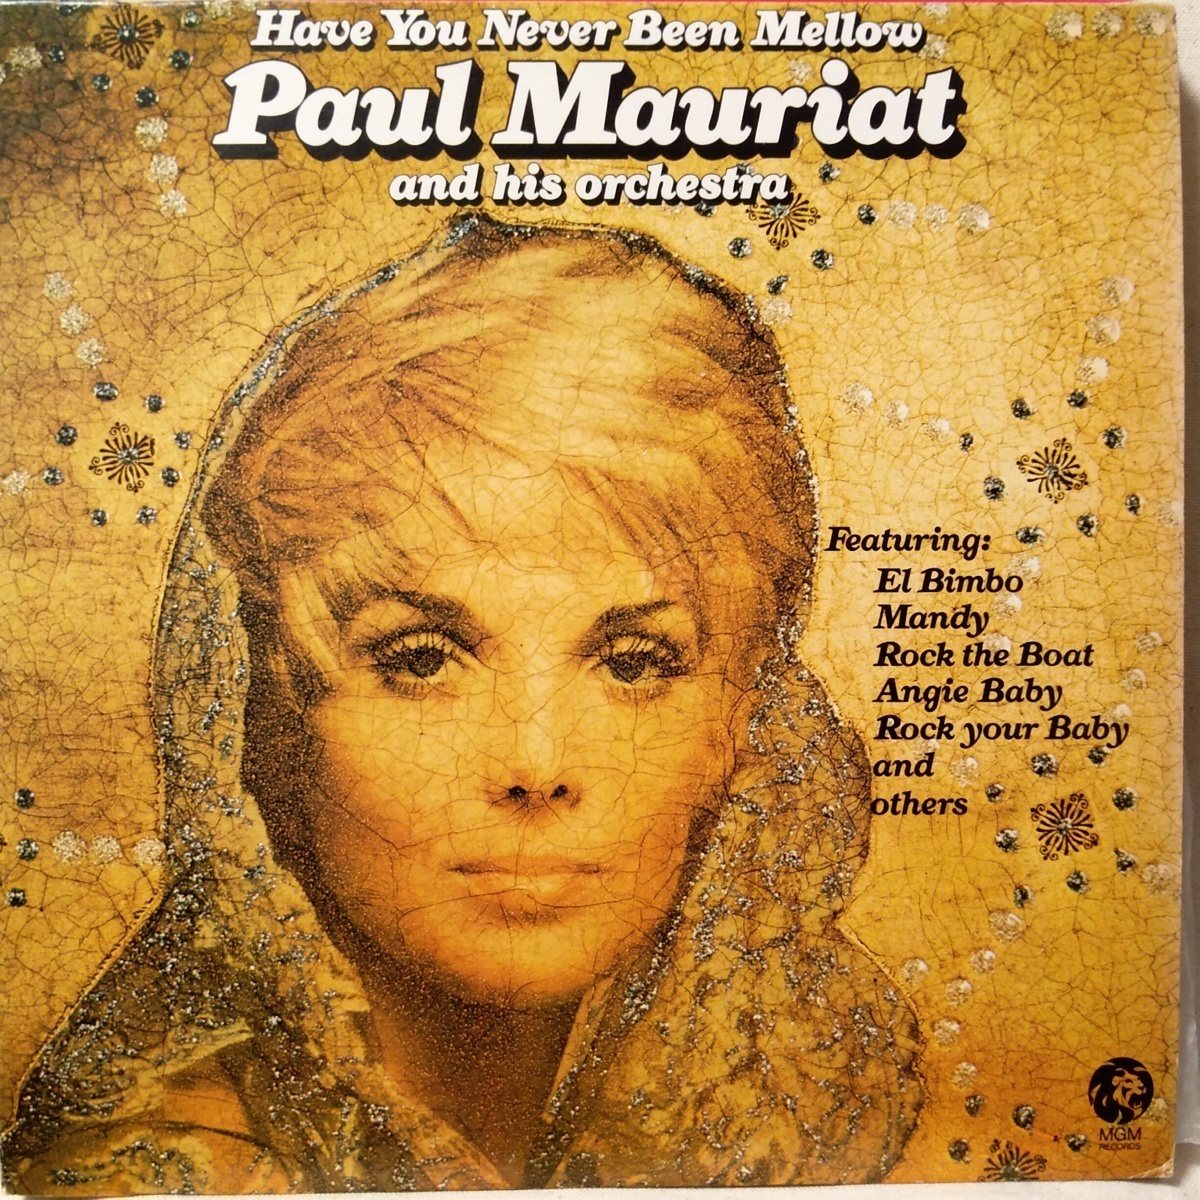 PAUL MAURIAT HAVE YOU NEVER BEEN MELLOW ★ 珍しいUS盤 ★ ムード・イージーリスニング ★ アナログ盤 [6661RP_画像1